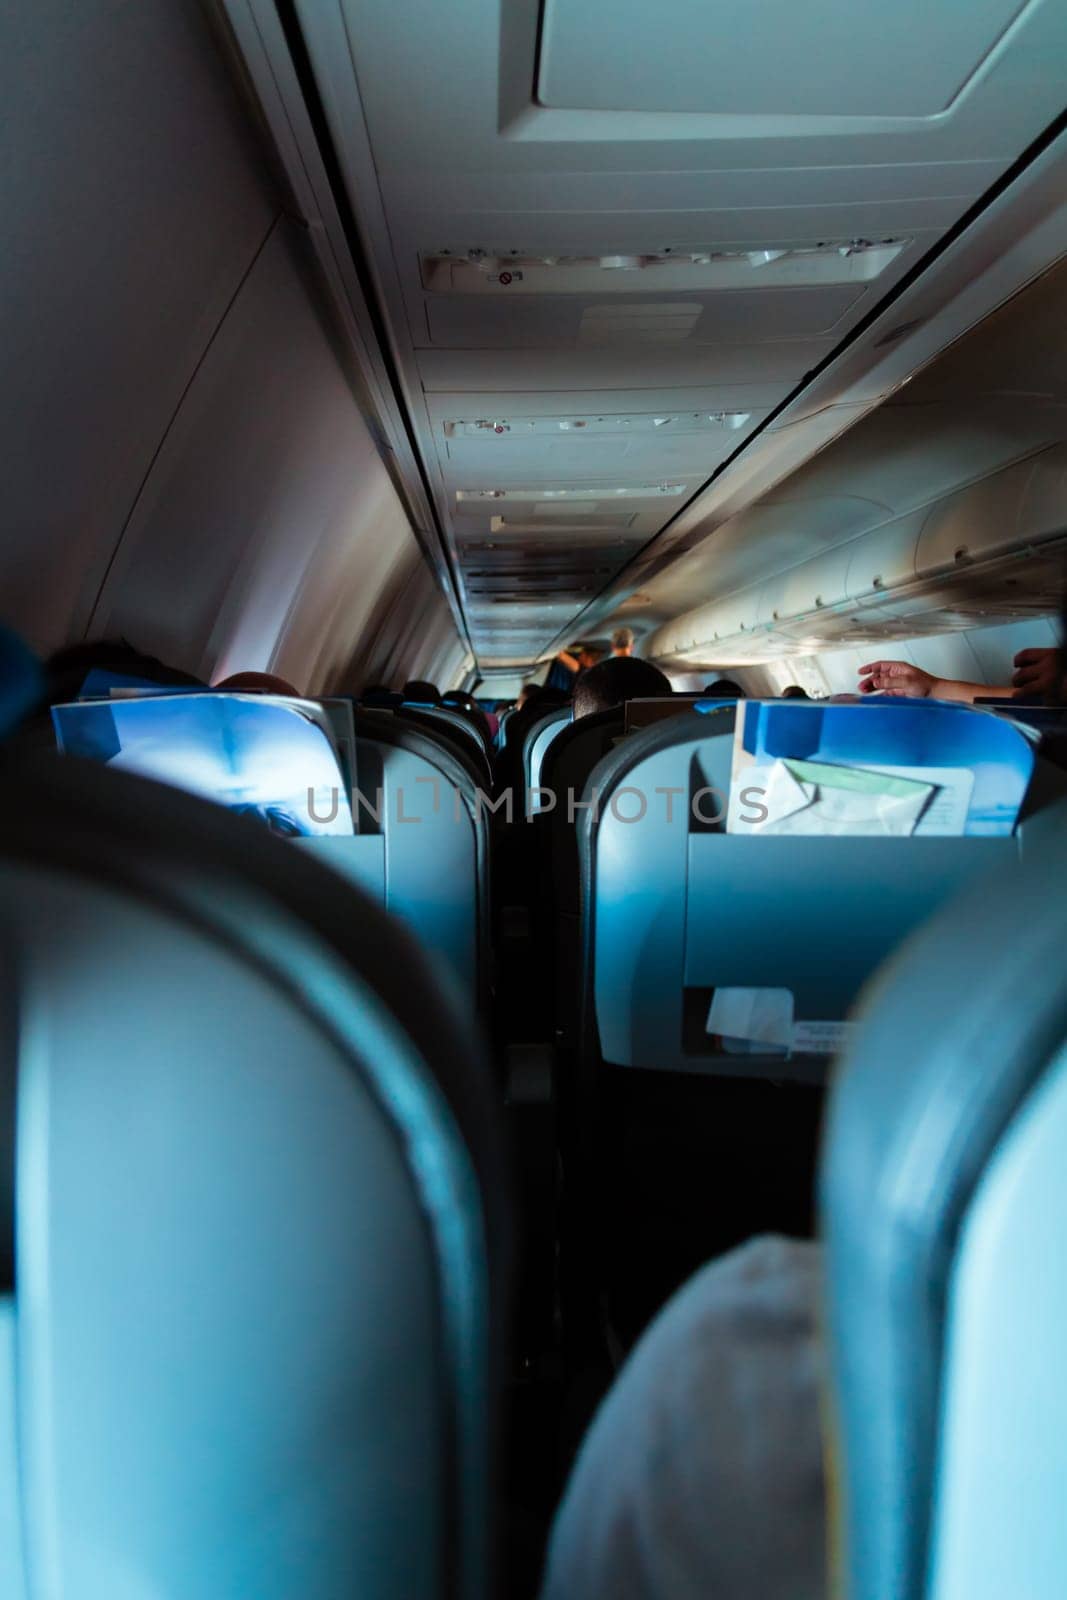 Interior of passenger airplane with people on seats.